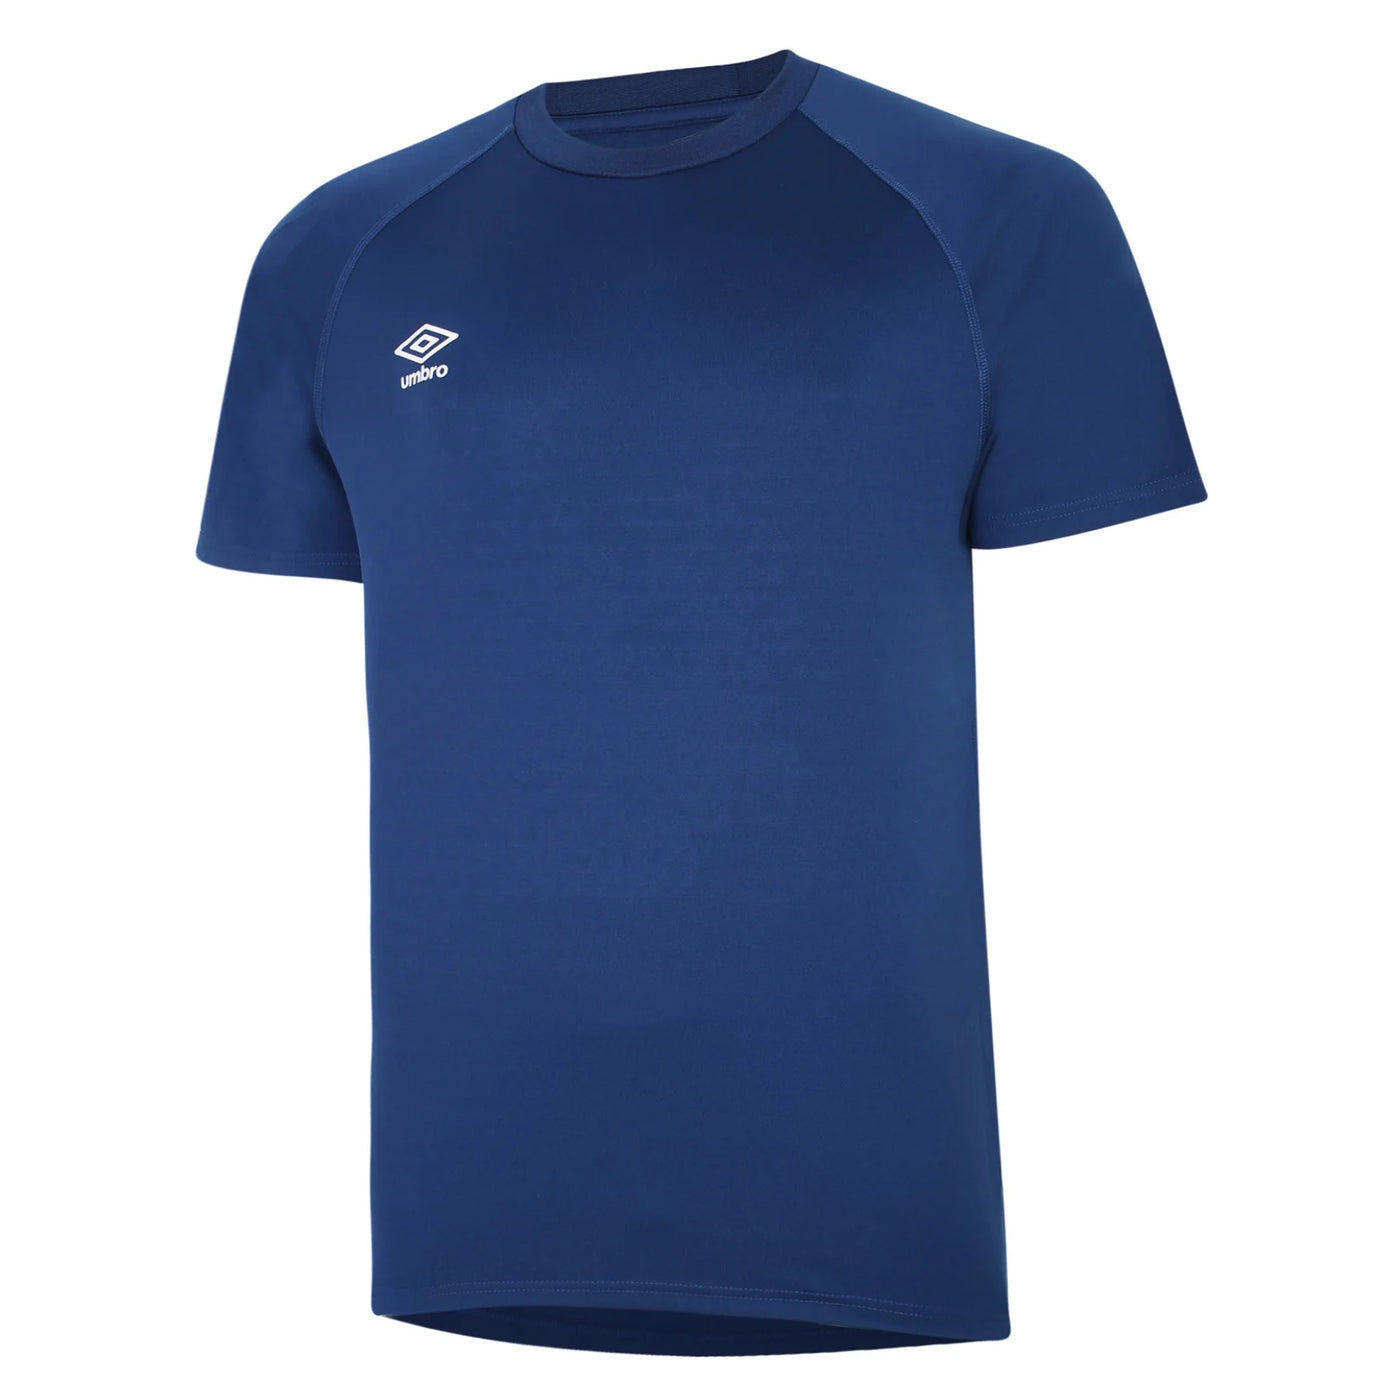 Umbro Rugby Training Drill Jersey Men